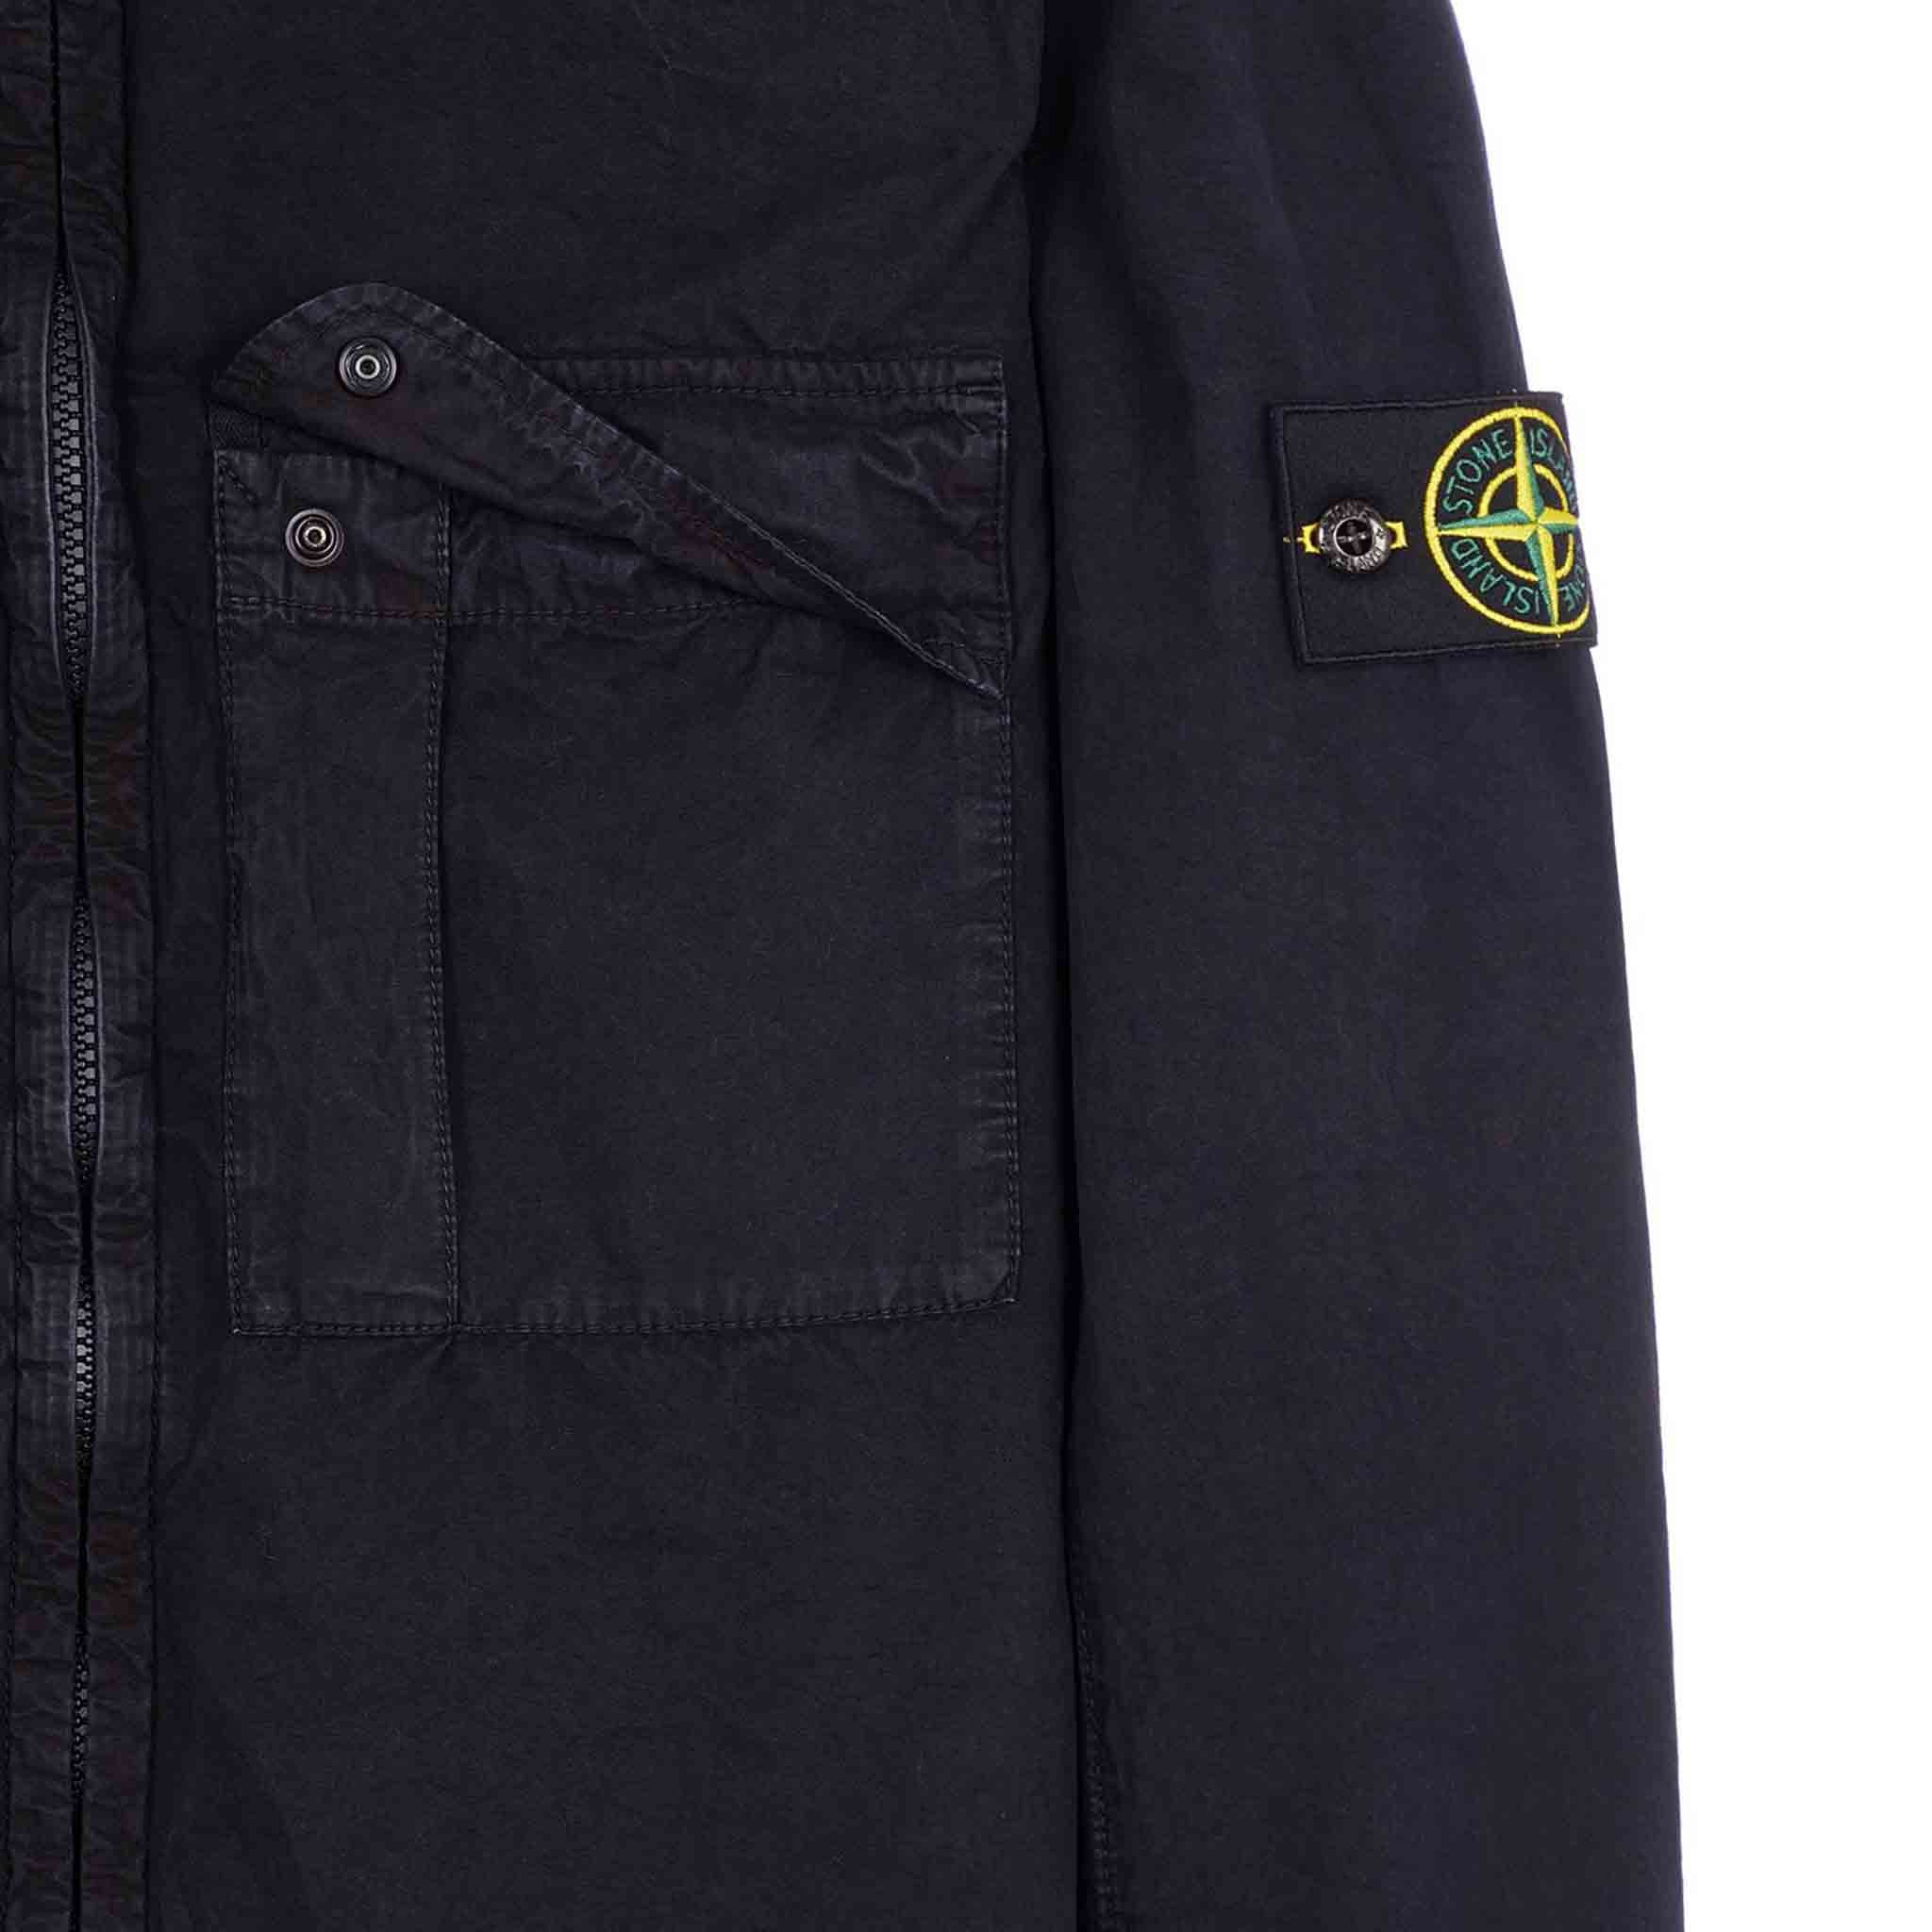 Stone Island 'Old Treatment' Regular Fit Overshirt in Navy